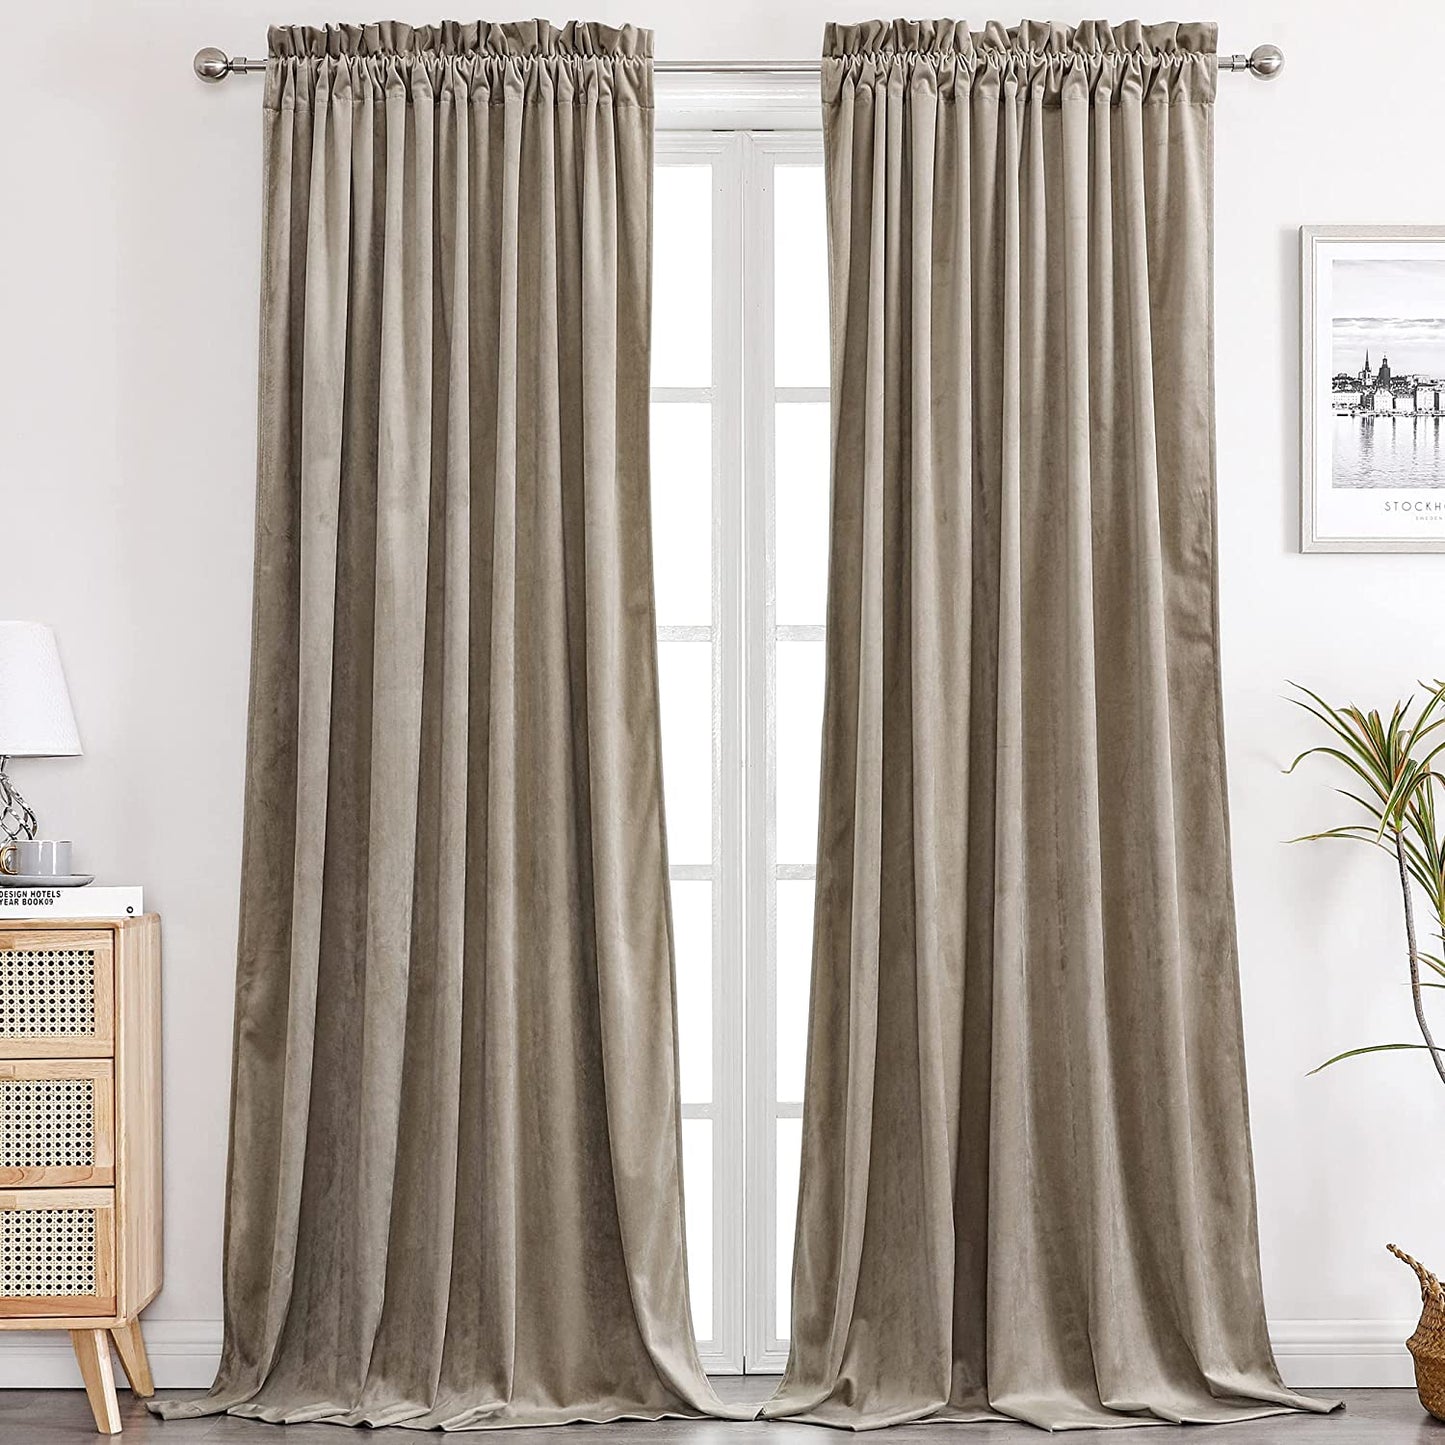 Benedeco Green Velvet Curtains for Bedroom Window, Super Soft Luxury Drapes, Room Darkening Thermal Insulated Rod Pocket Curtain for Living Room, W52 by L84 Inches, 2 Panels  Benedeco Taupe W52 * L84 | 2 Panels 